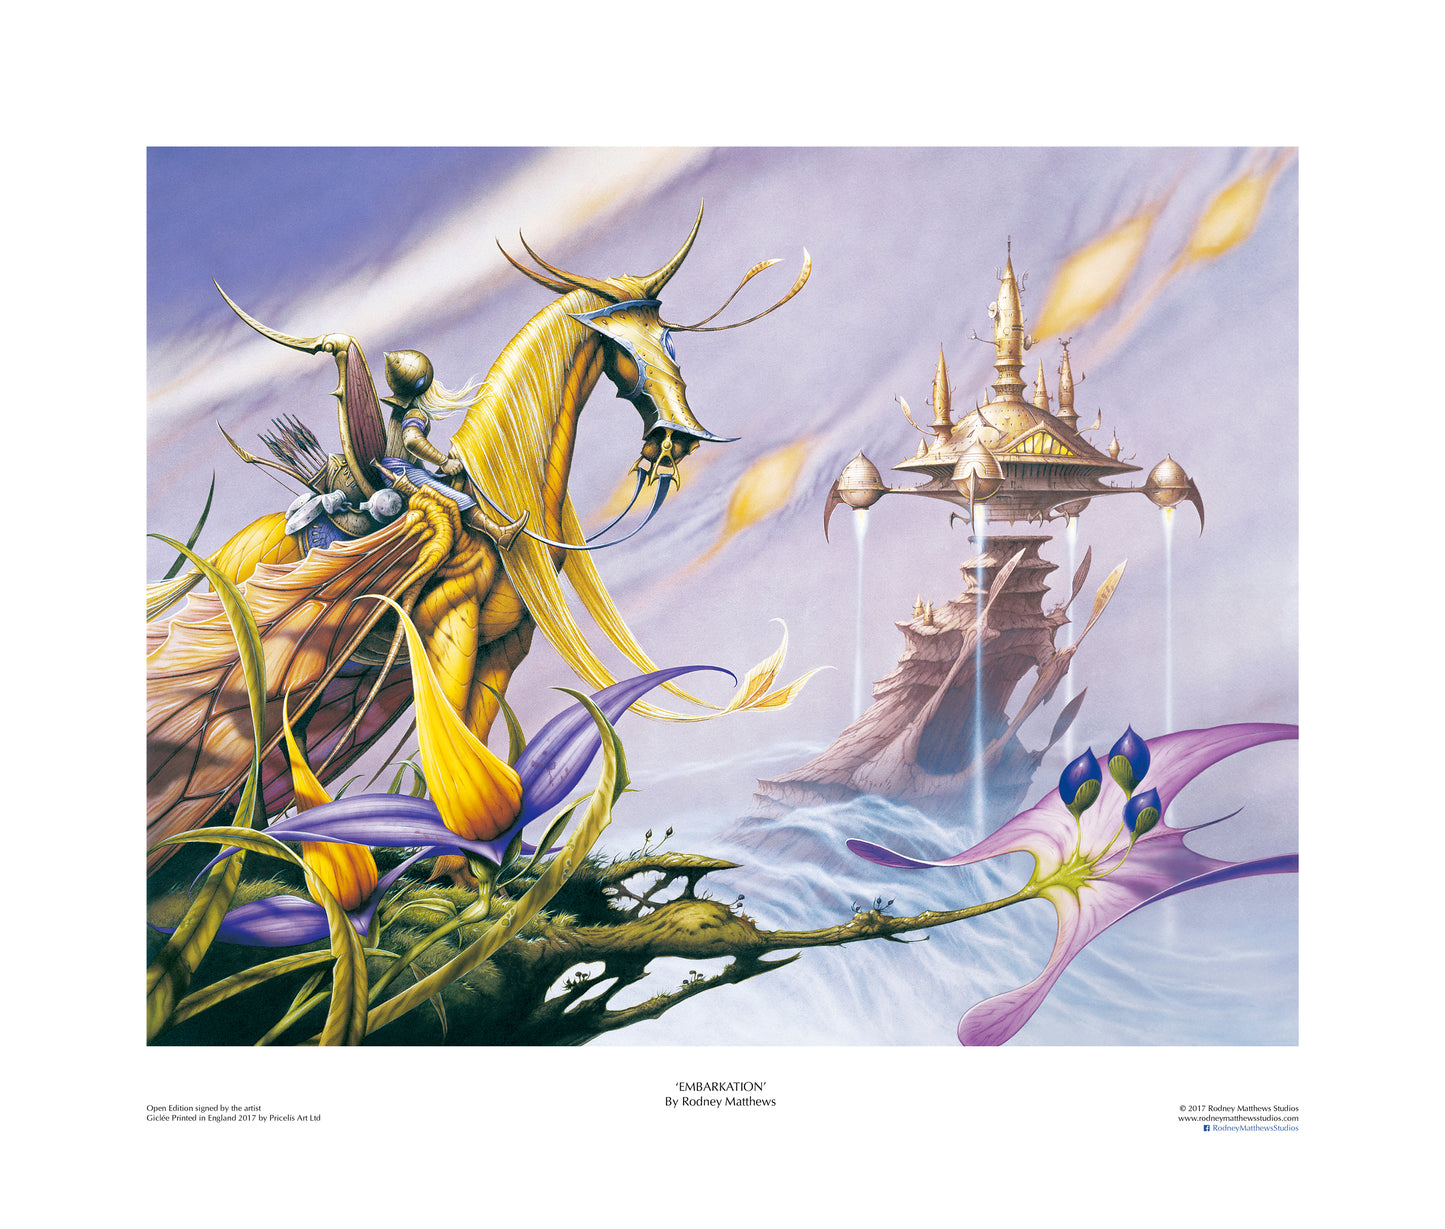 Embarkation open edition print, hand-signed by Rodney Matthews